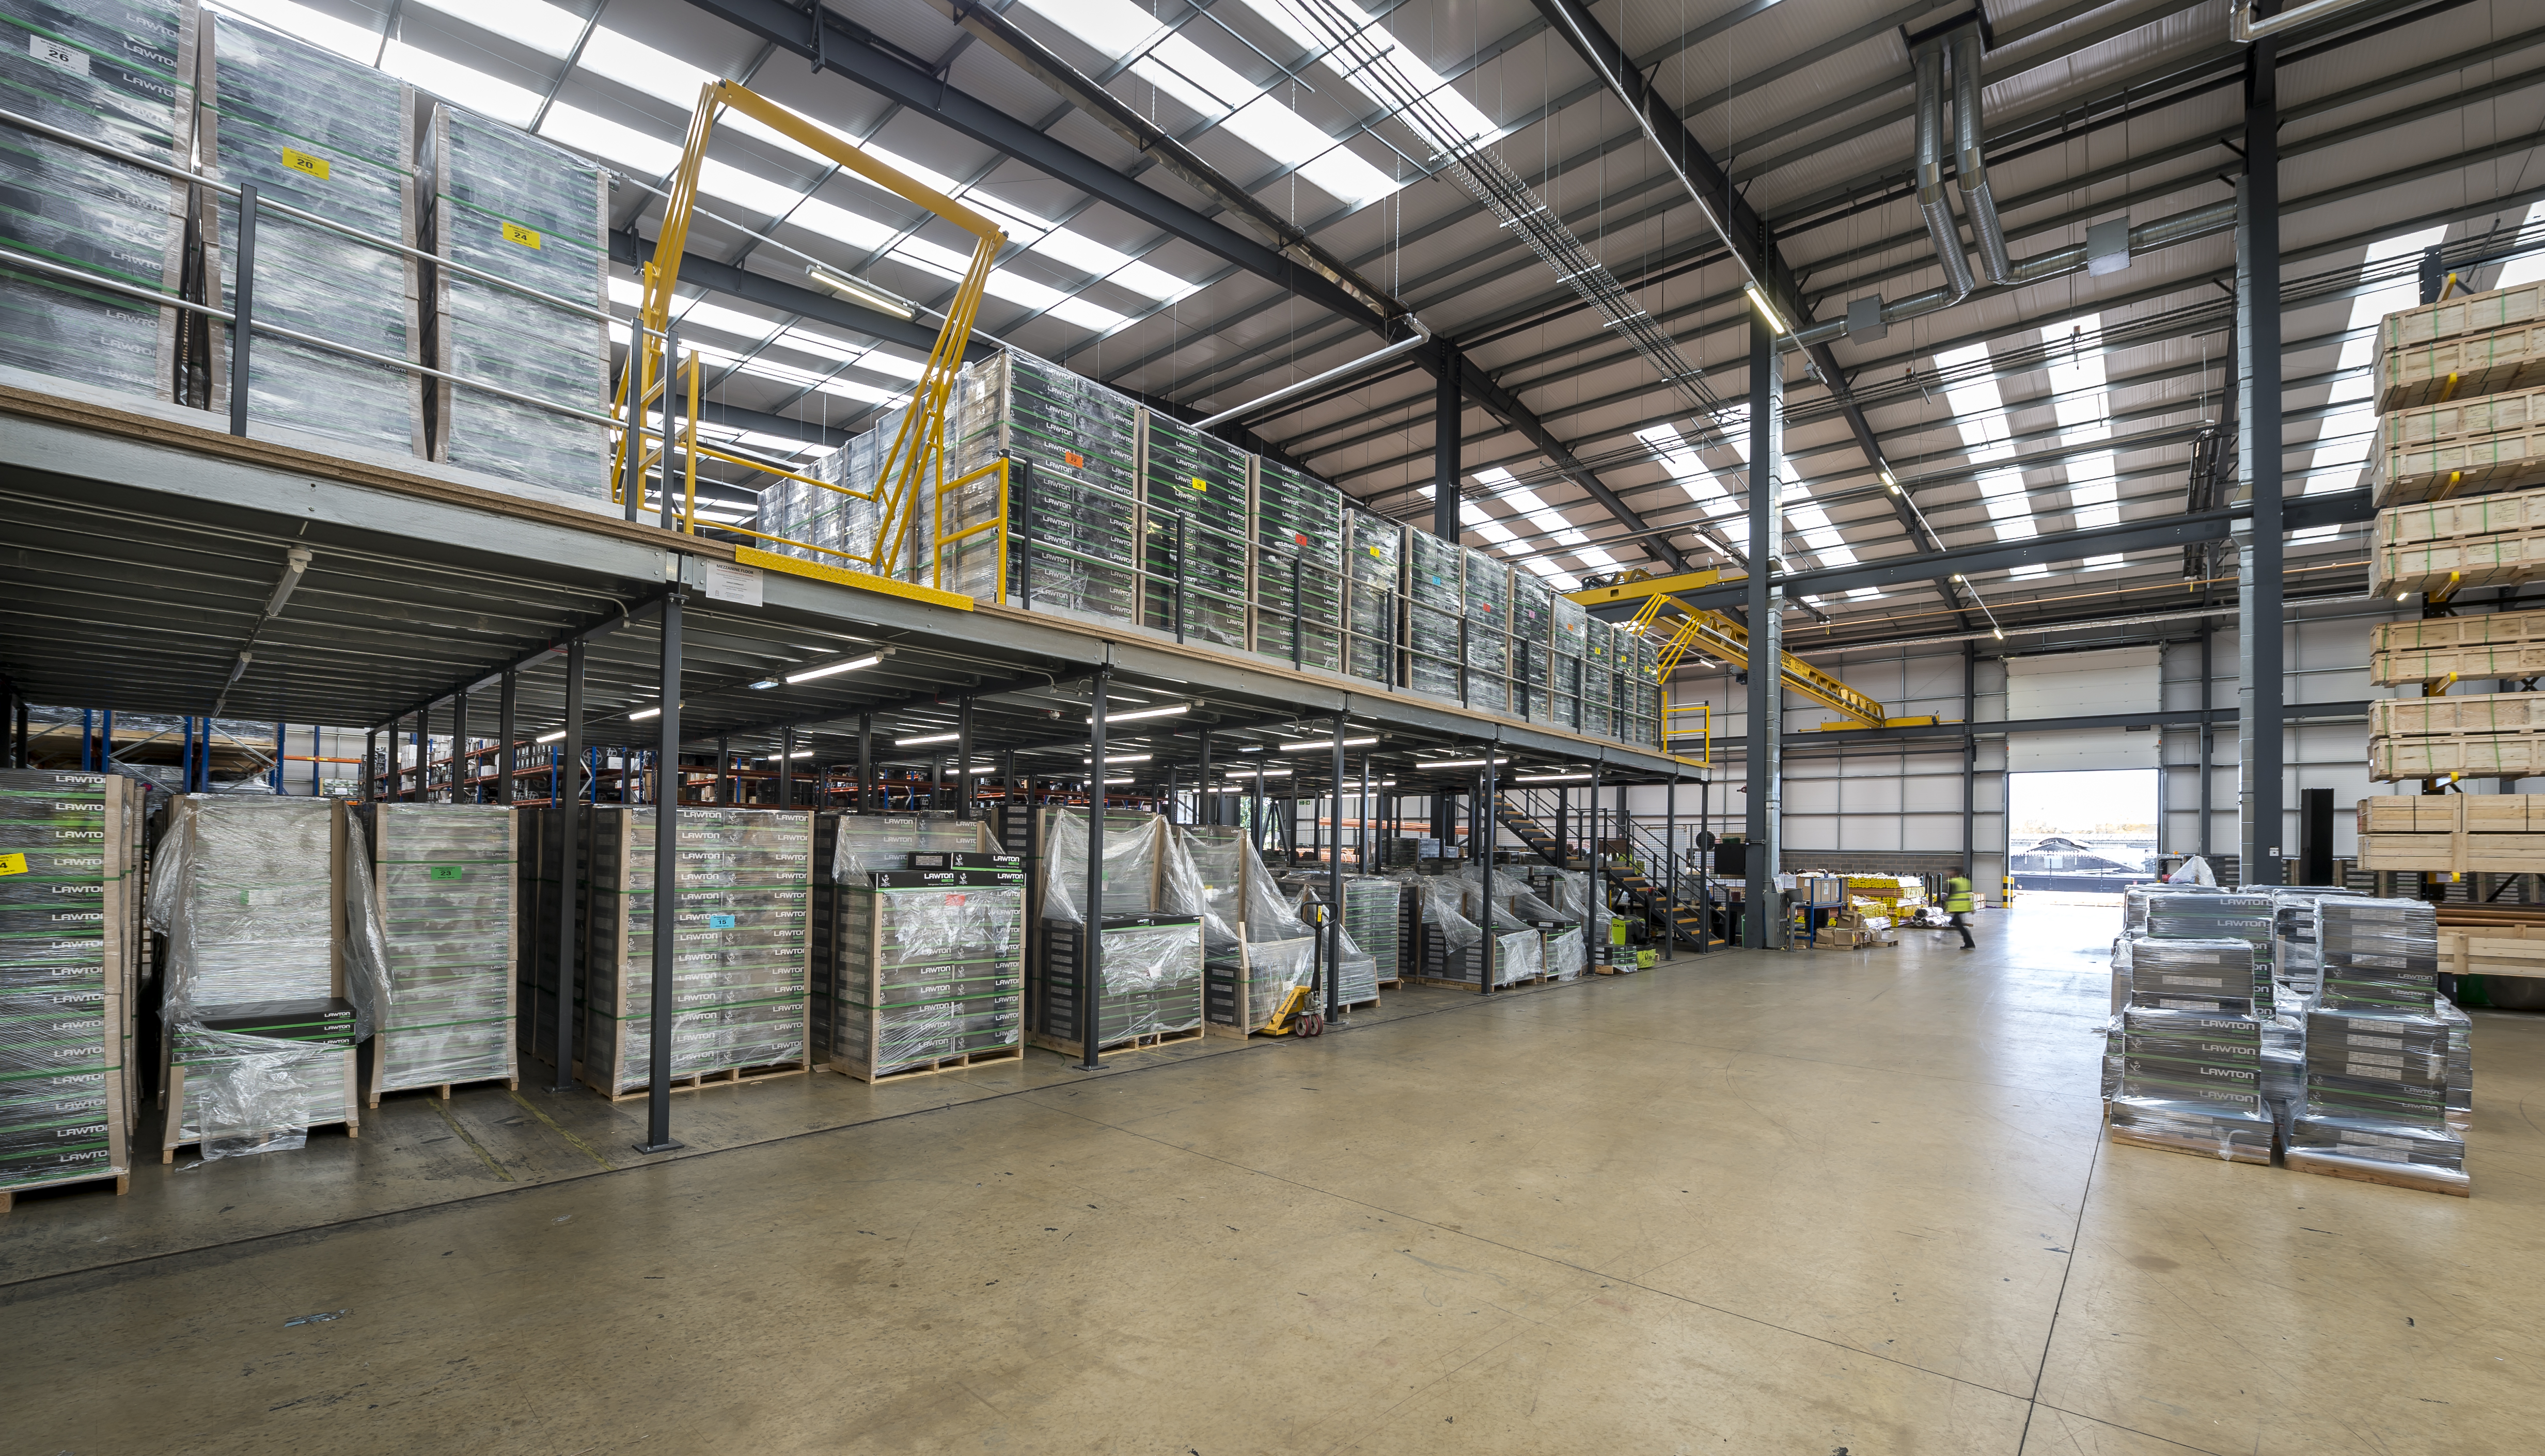 Making the Most of Available Space Using A Mezzanine Floor